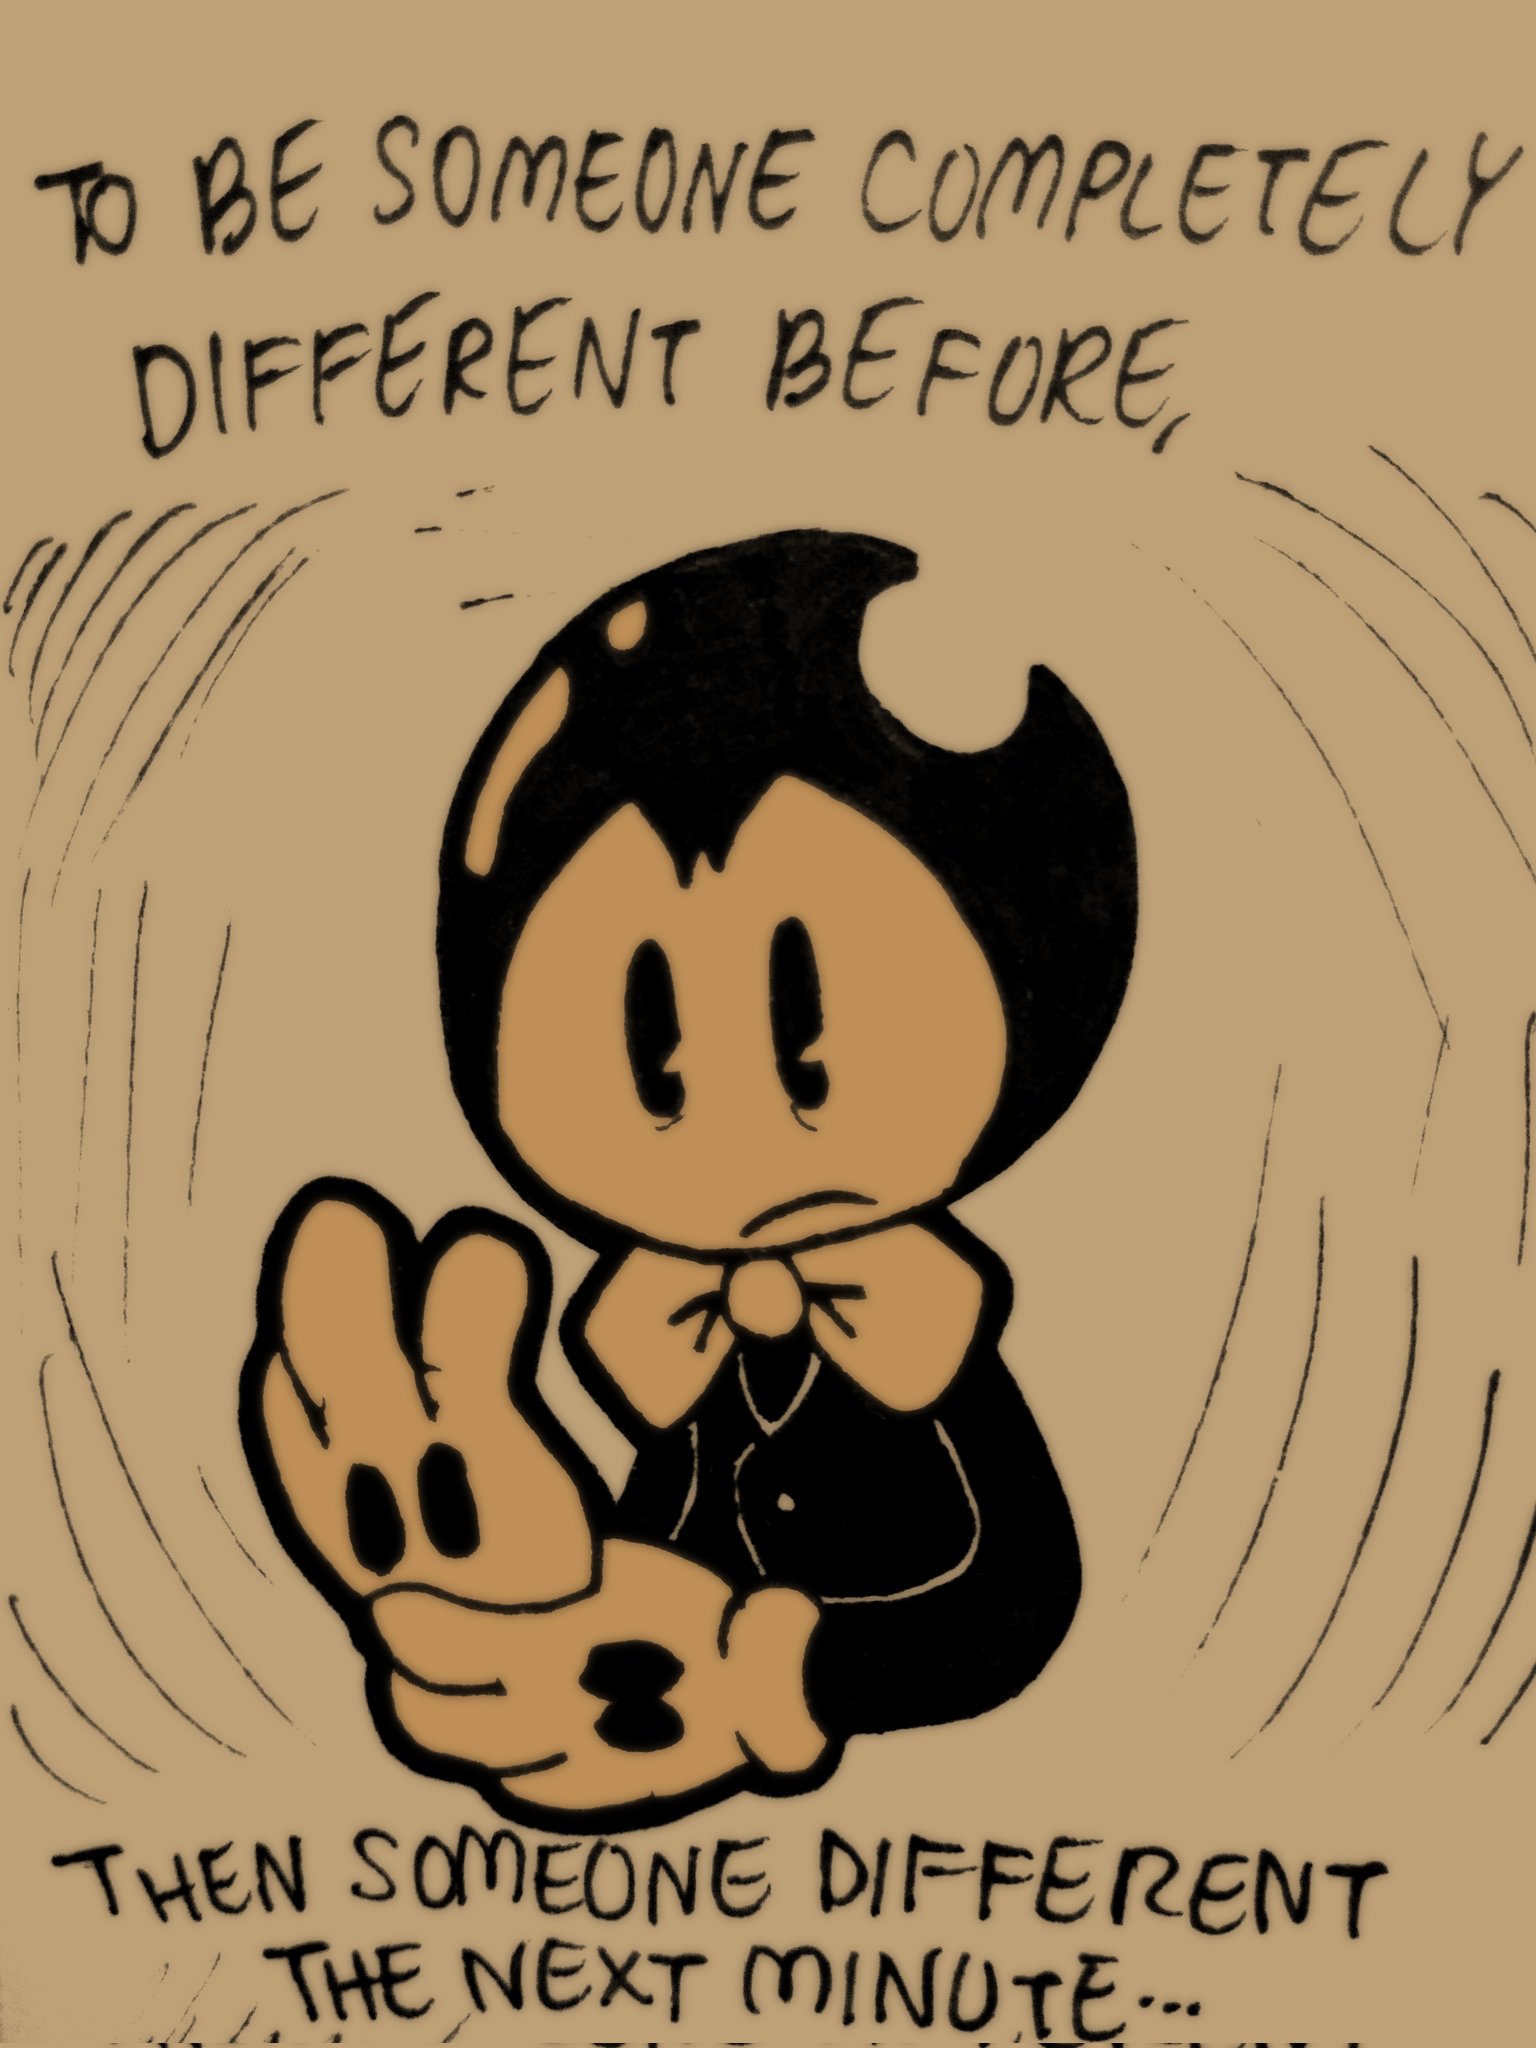 ⚡SalvagedEdish⚡ — A small AU where Bendy can't speak and meets